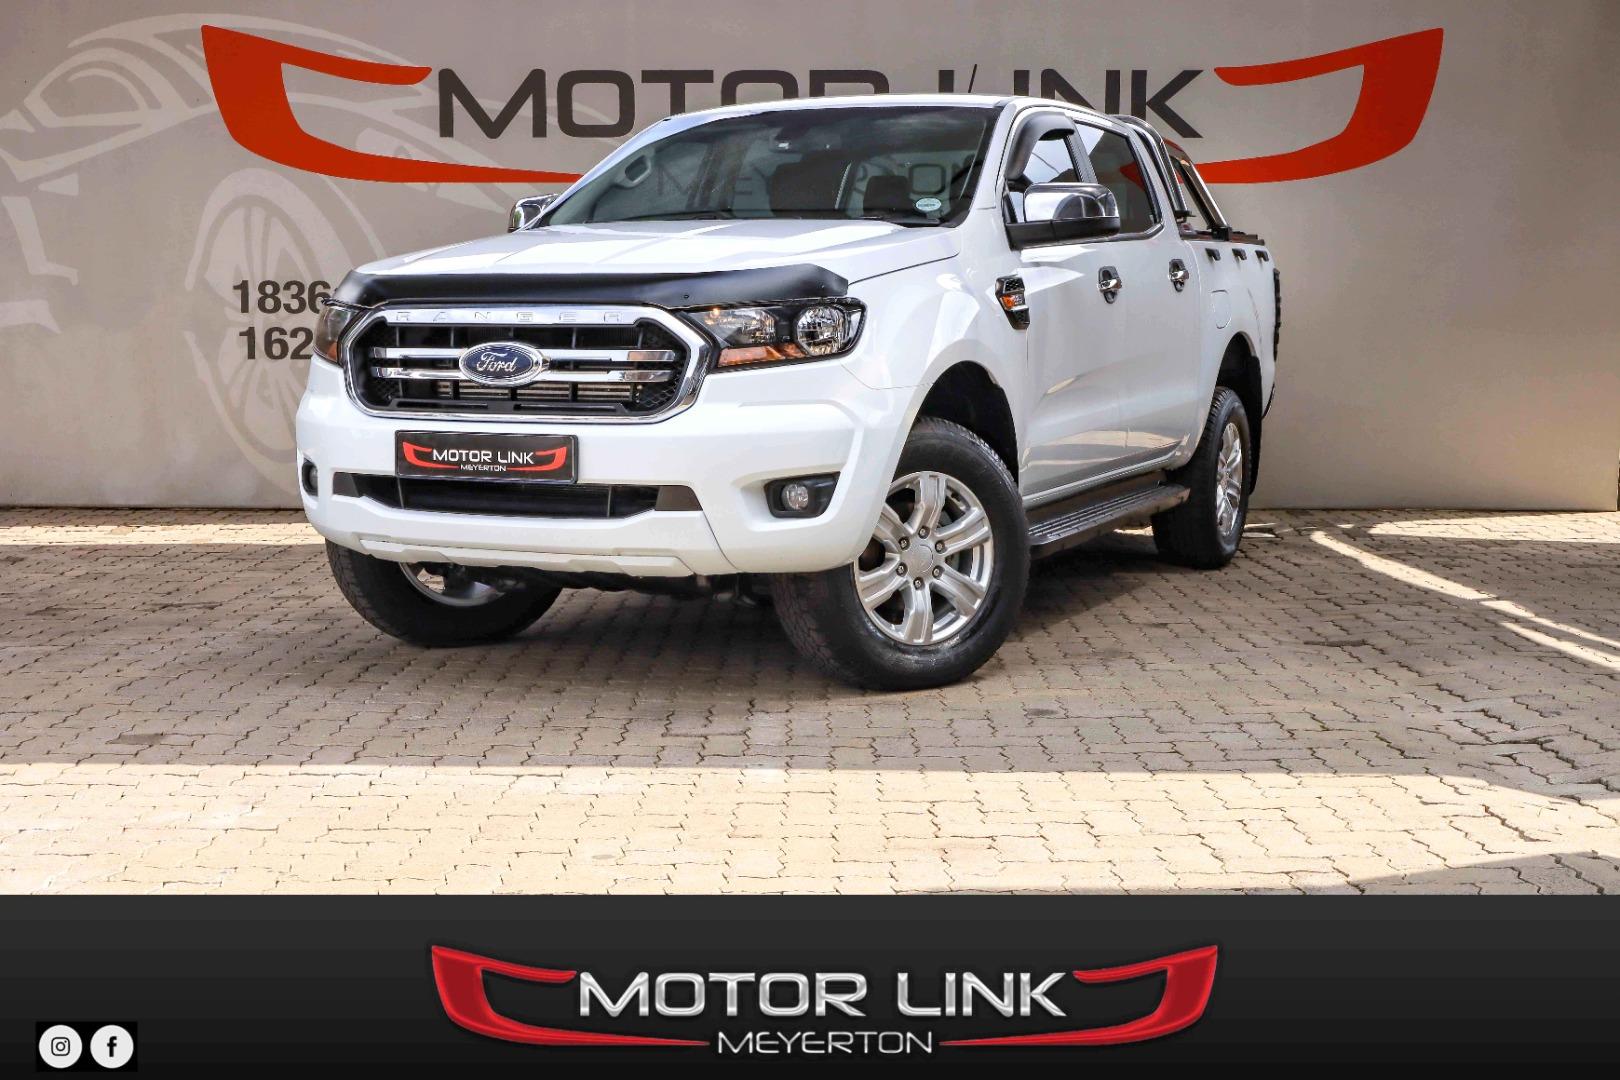 2019 Ford Ranger 2.2TDCi Double Cab Hi-Rider XLS For Sale